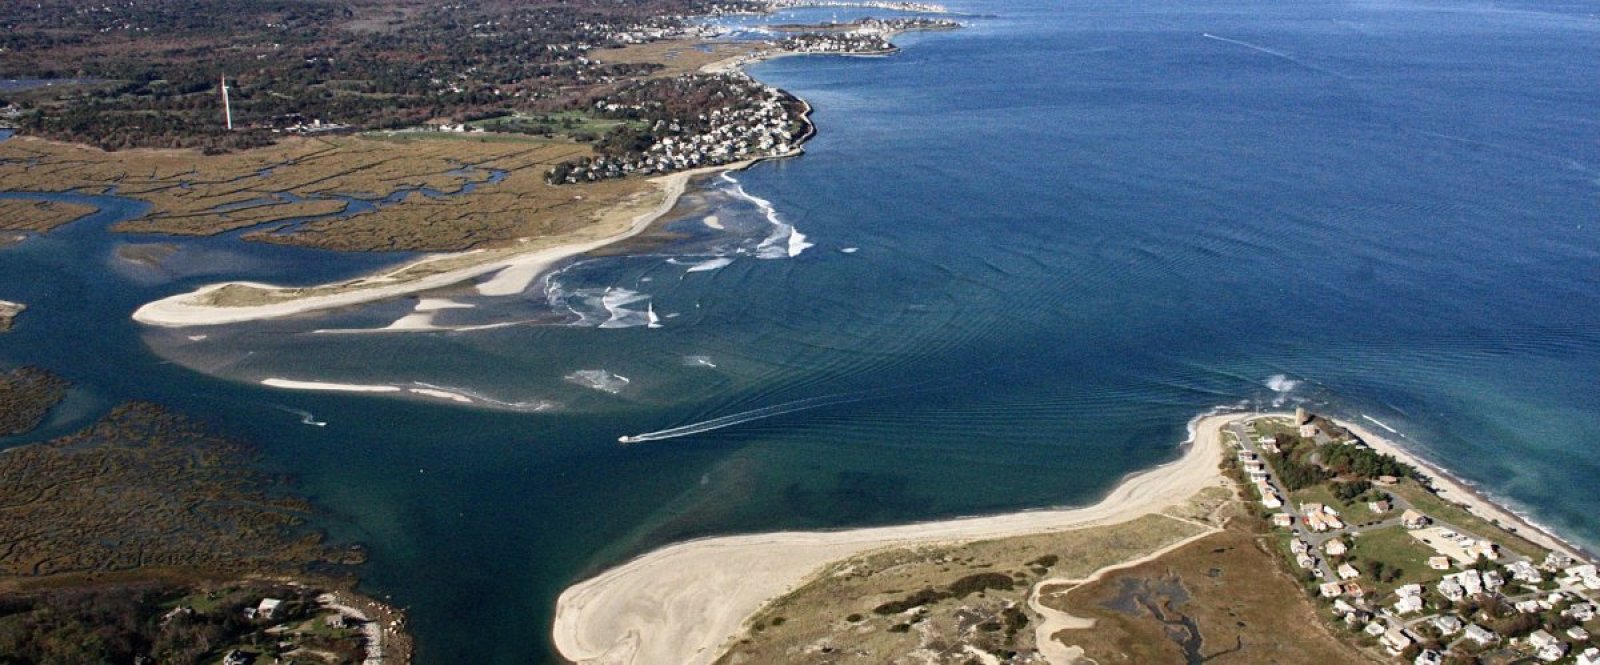 An aerial view of the New England coastline near Scituate